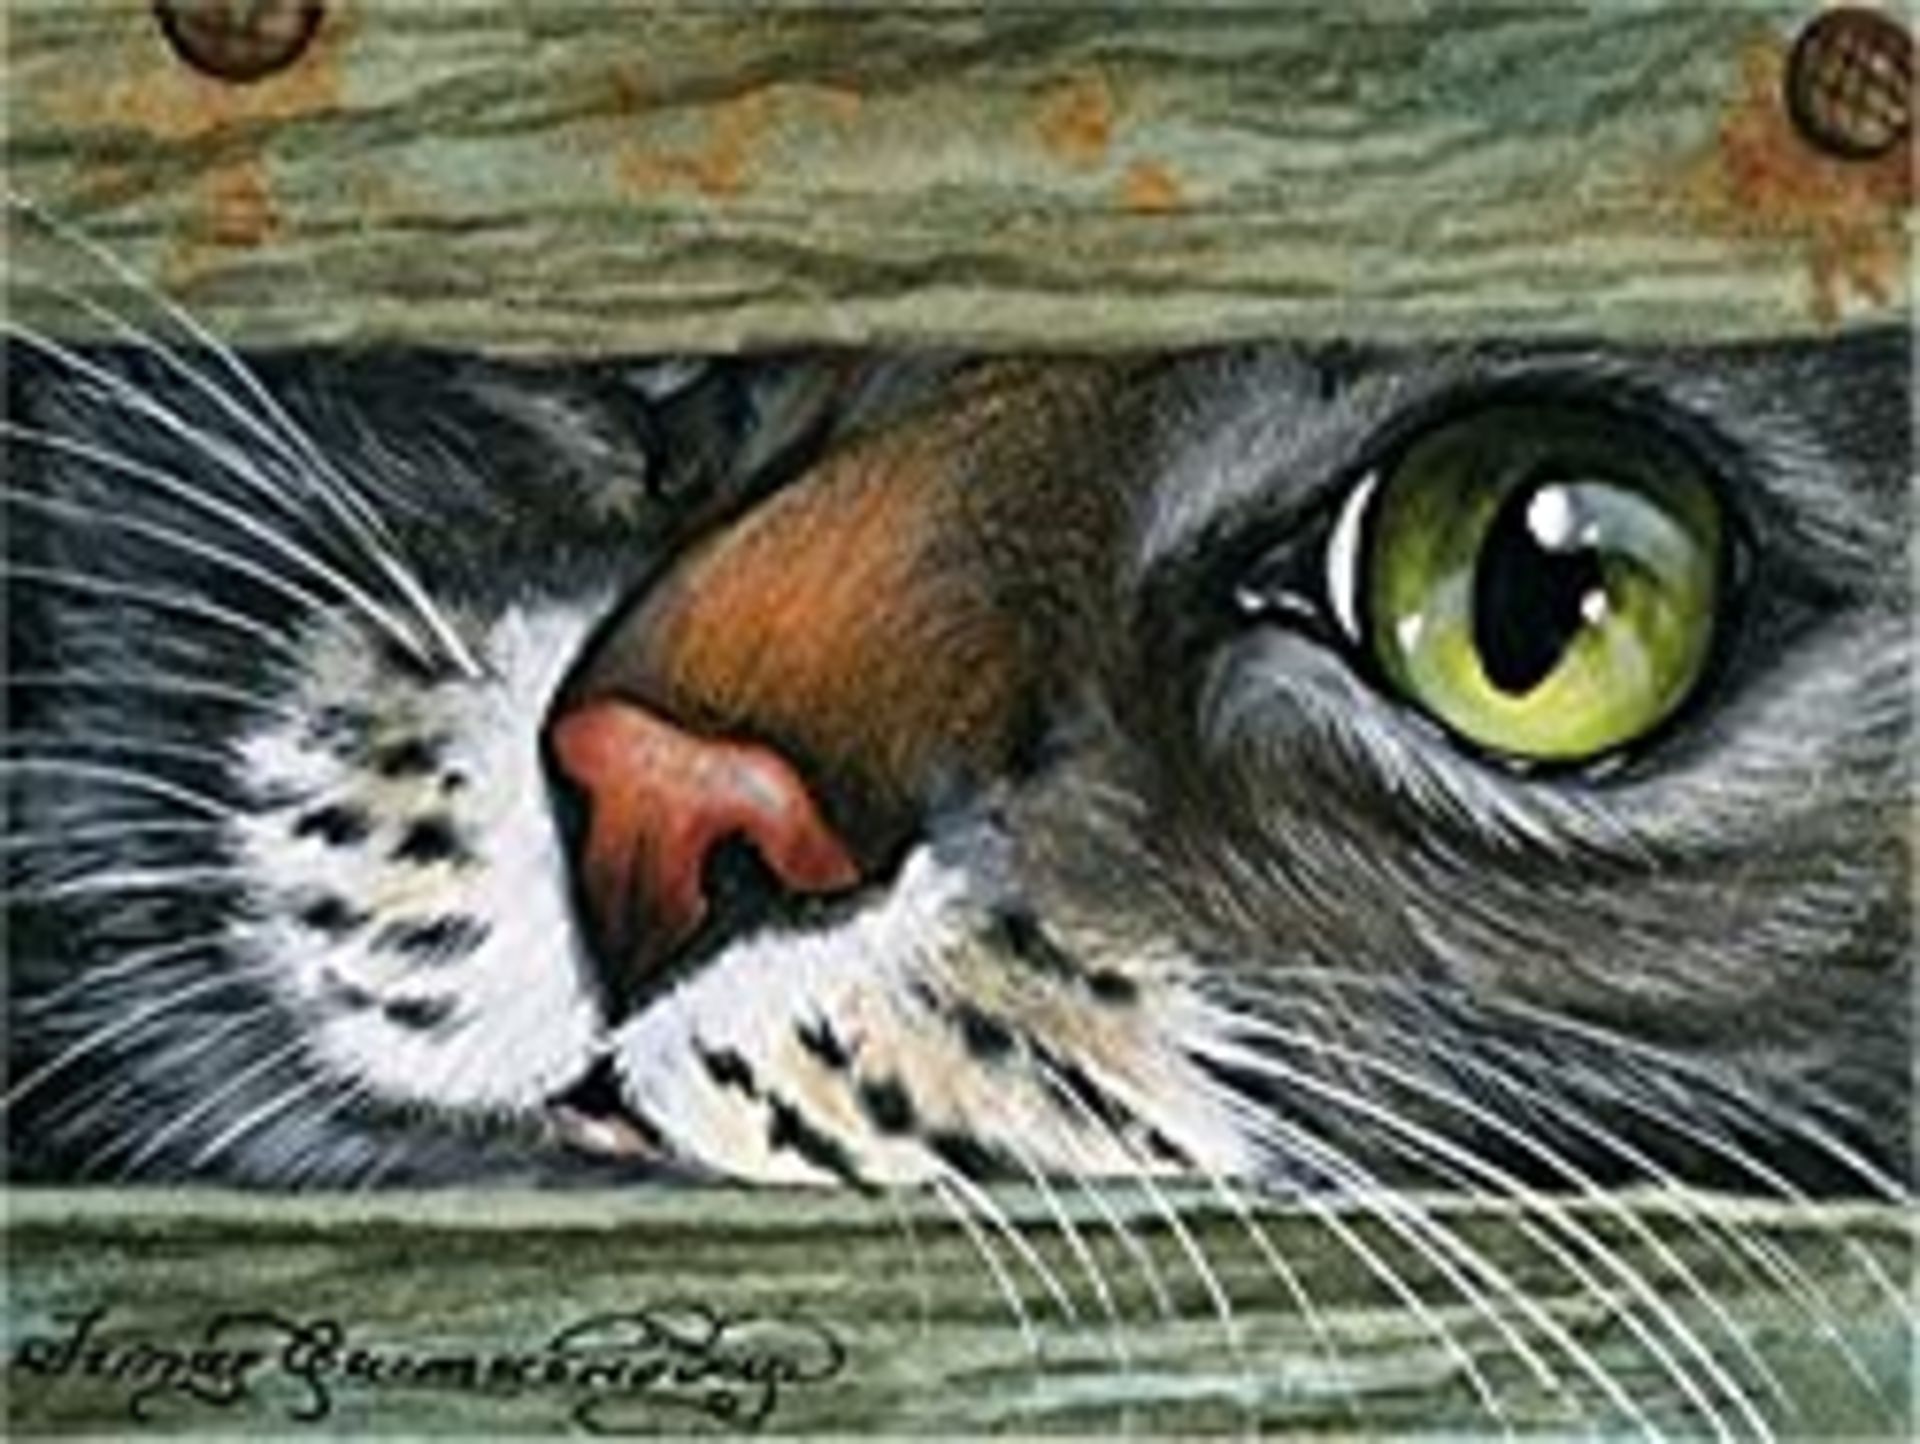 RRP £11.99 DIY Oil Paint by Number Kit for Adults Beginner 16x20 inch - Cat with Big Eye